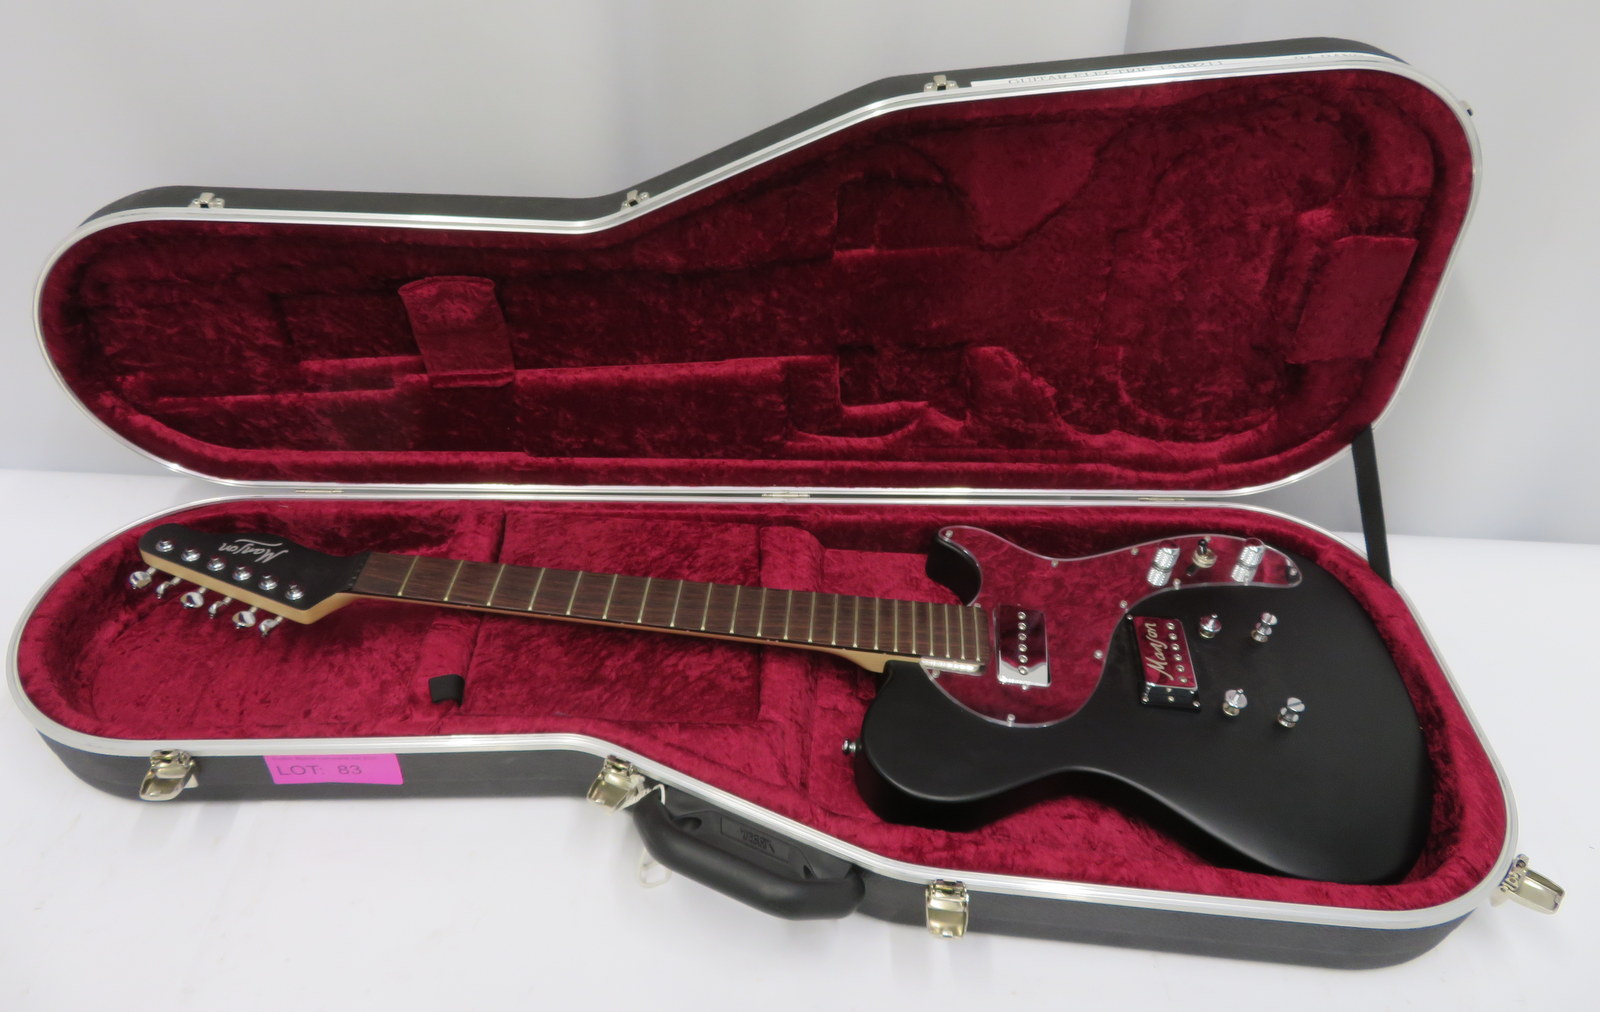 Manson electric guitar with hard case. Serial number: 1349211.